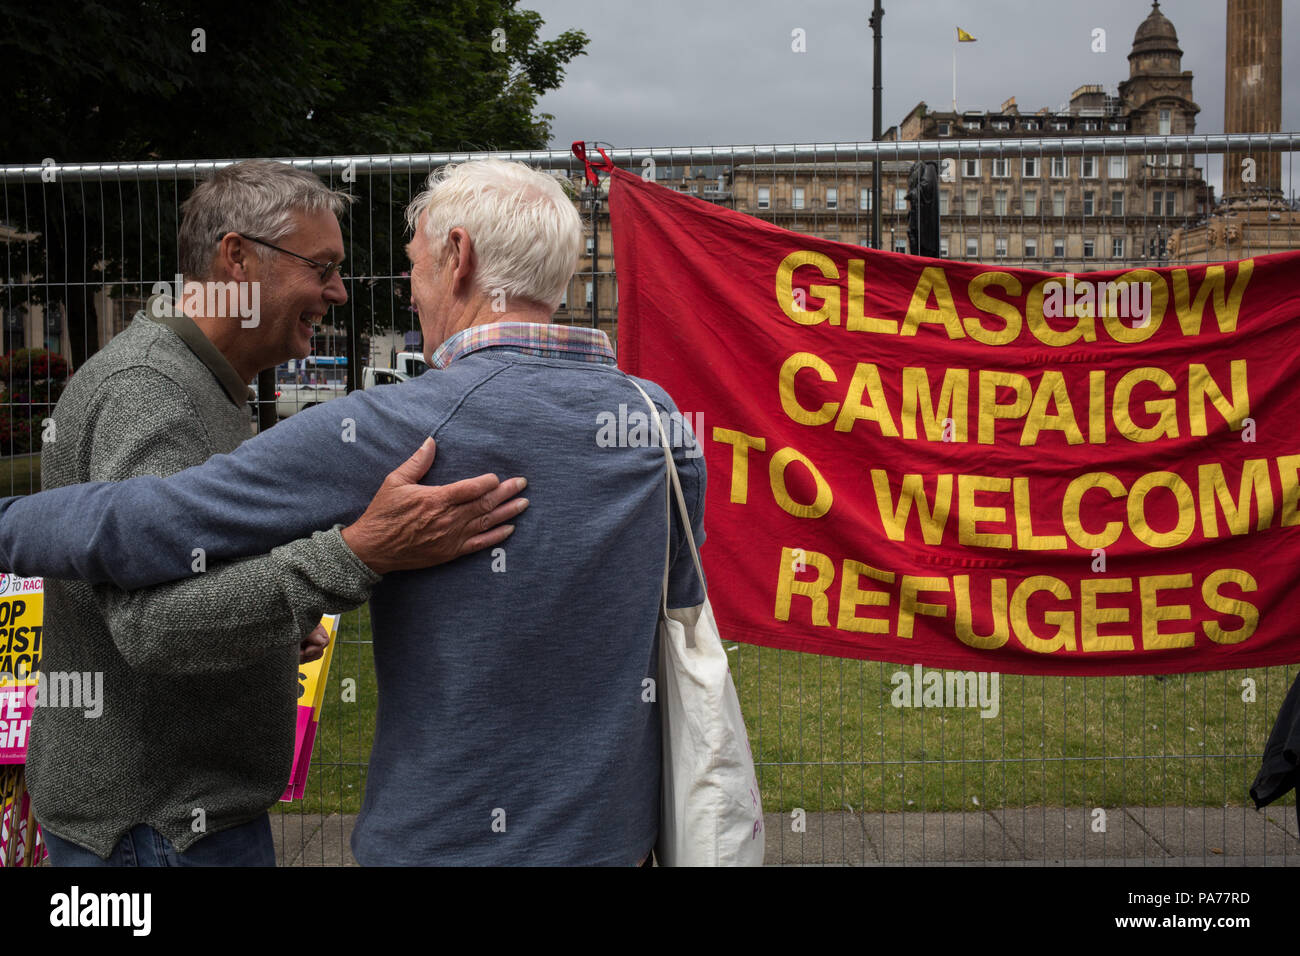 Glasgow, Scotland, on 21 July 2018. A counter demonstration by United Against Facism supporters, during a protest by the far right Scottish Defence League, in George Square, Glasgow, Scotland.  Mounted police and police with dogs separated the two groups as the Scottish Defence League espoused their anti-immigrant rhetoric and accused immigrants of running grooming gangs. Image credit: Alamy News. Stock Photo